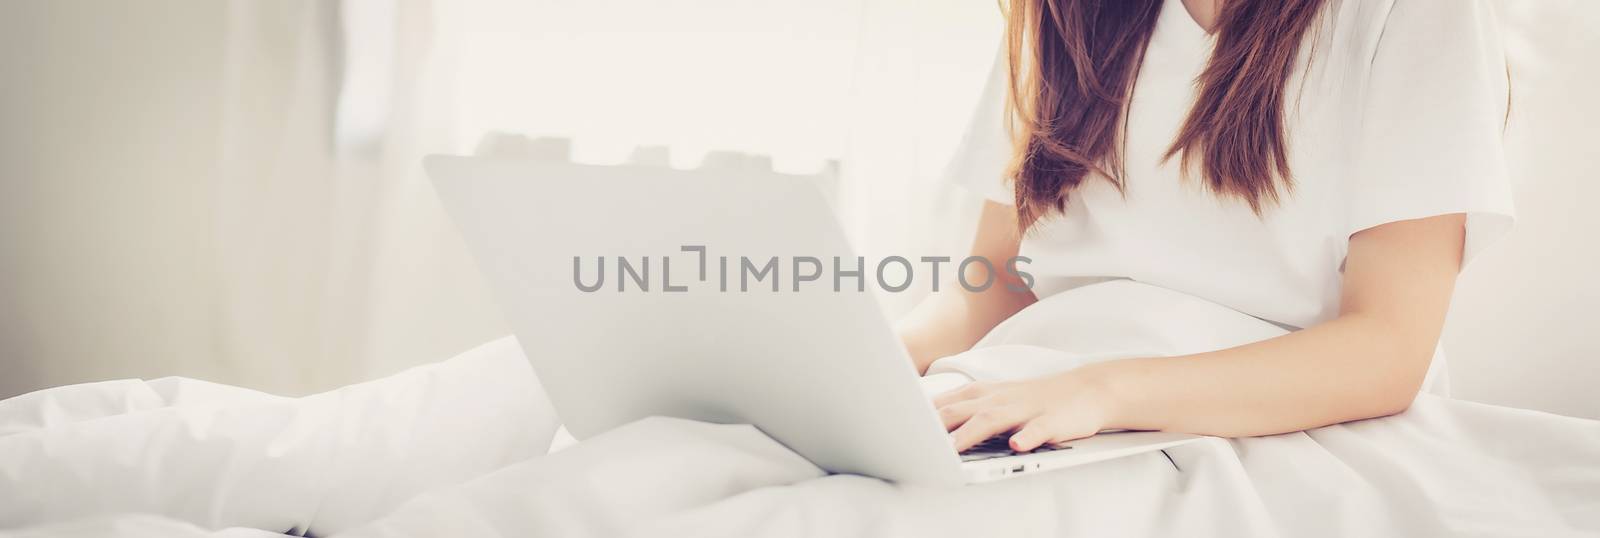 Banner website beautiful asian young woman setting on bed using  by nnudoo